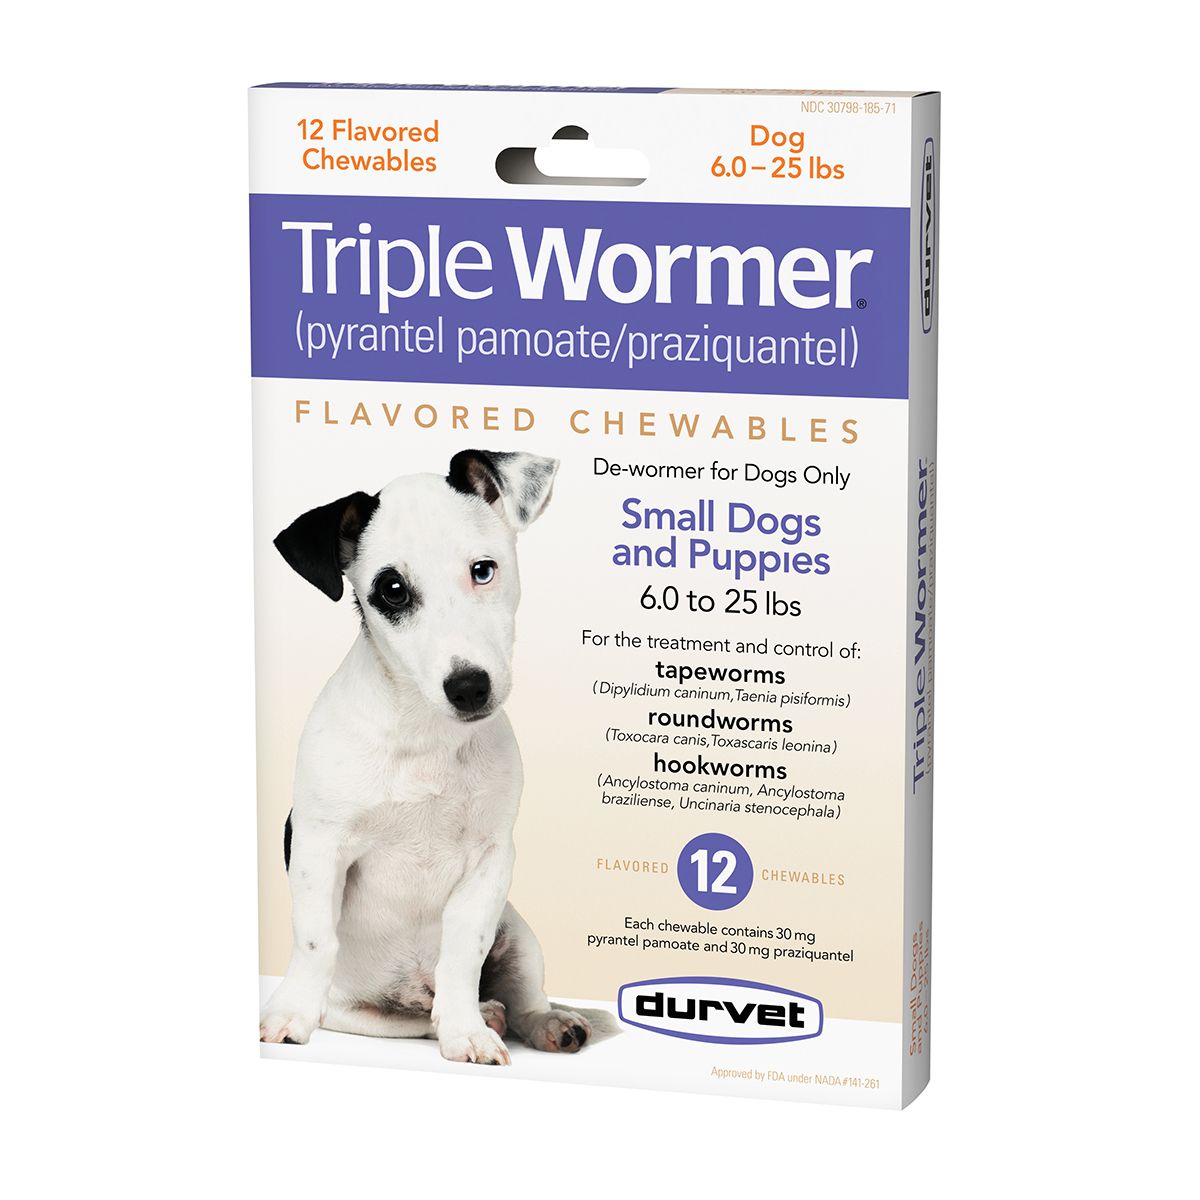 Triple Wormer Dewormer for Dogs